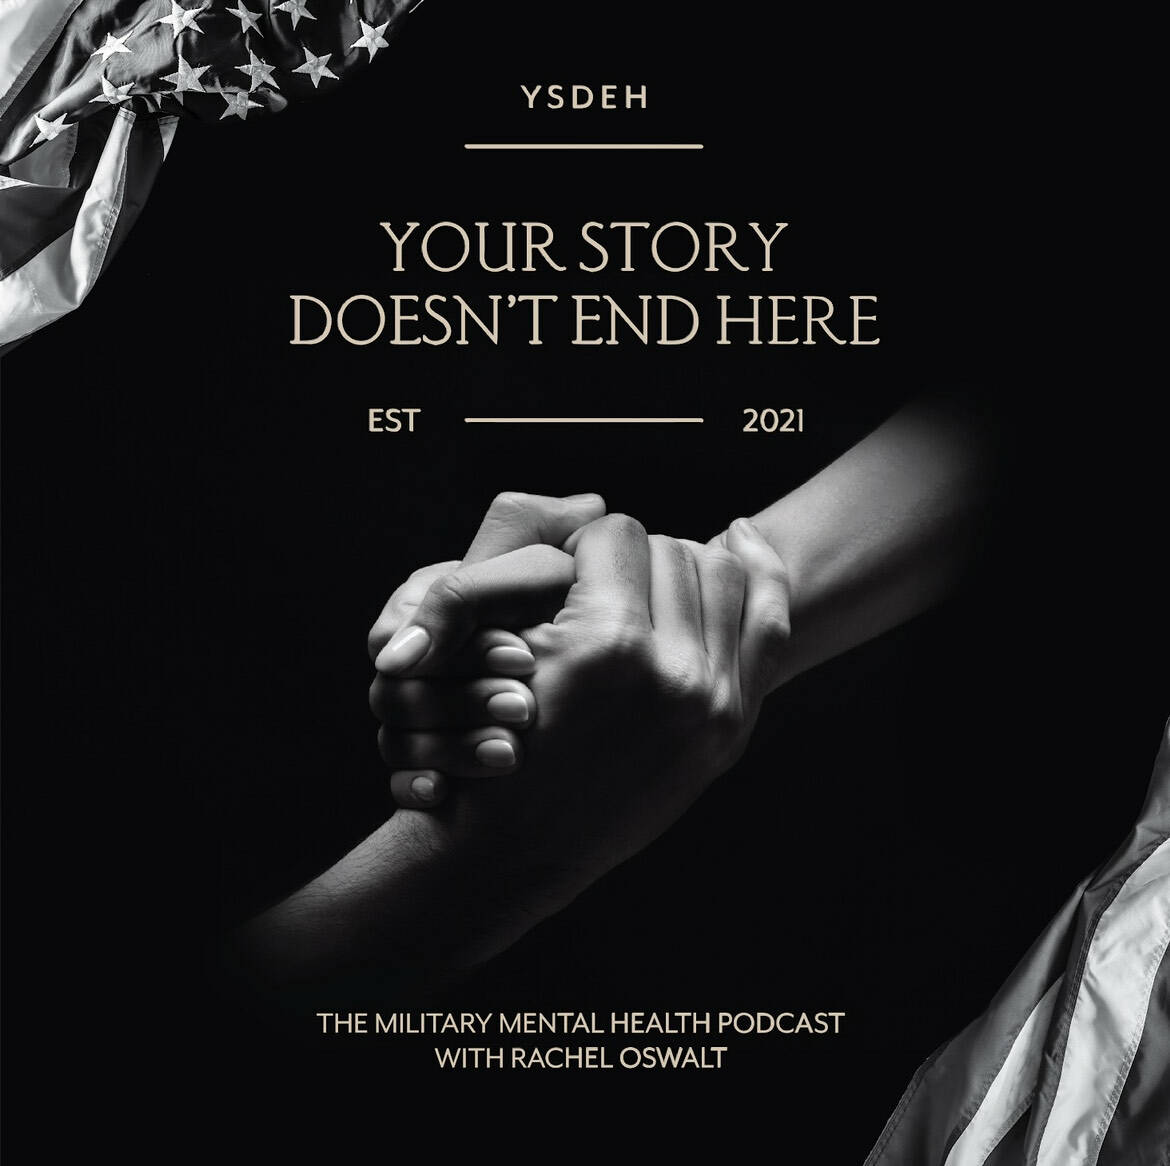 Your Story Doesn’t End Here is a podcast on military mental health and suicide awareness by Oak Harbor veteran Rachel Oswalt. (Image provided)